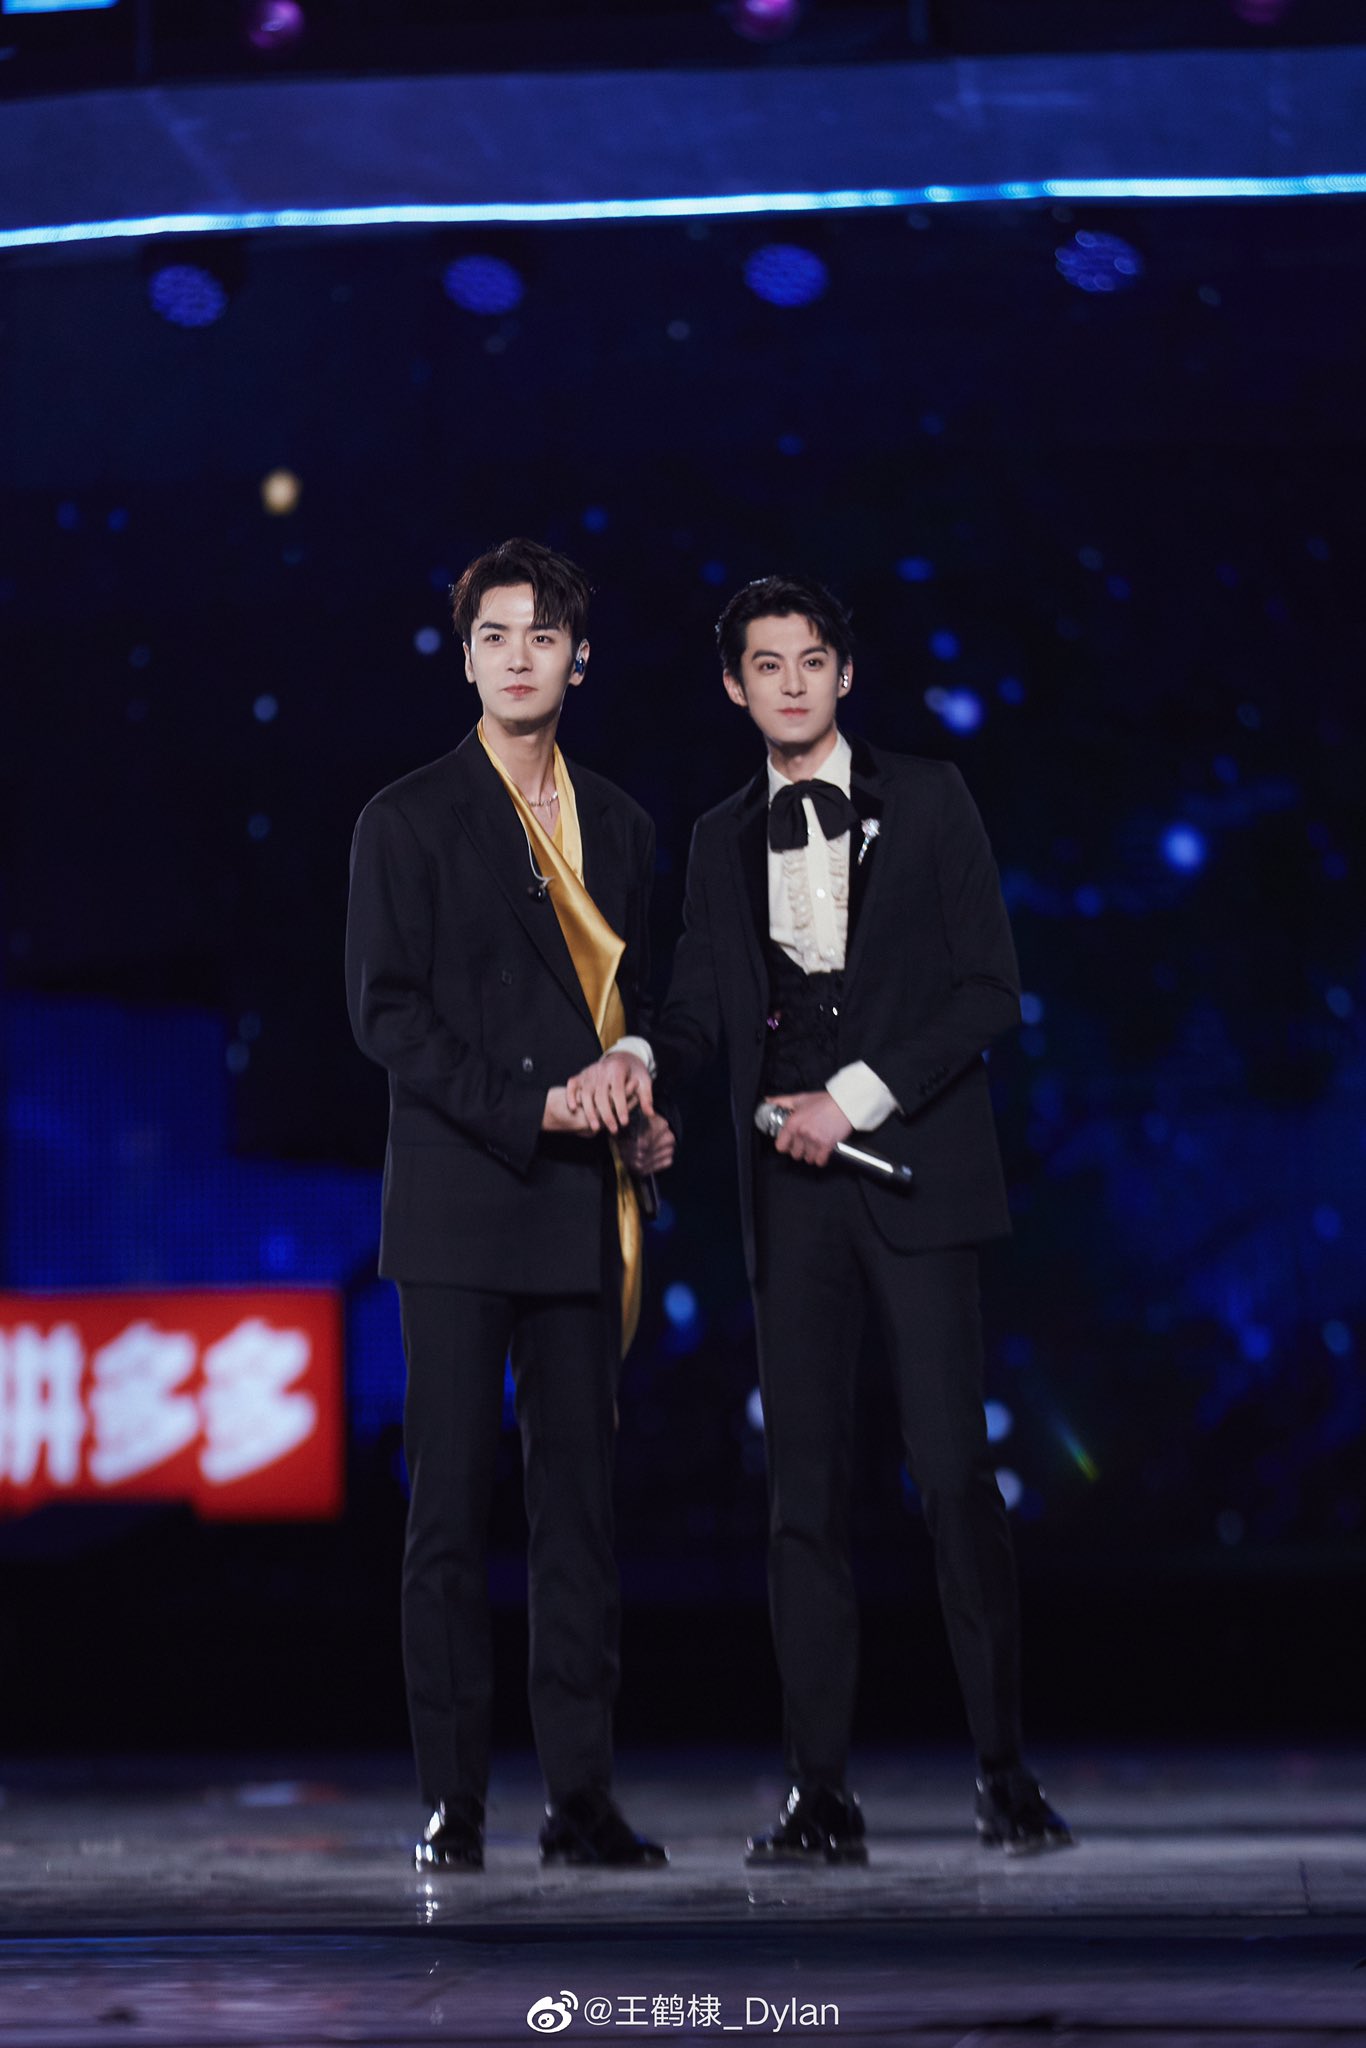 dylan wang archive on X: 250421 The Rational Life weibo updates